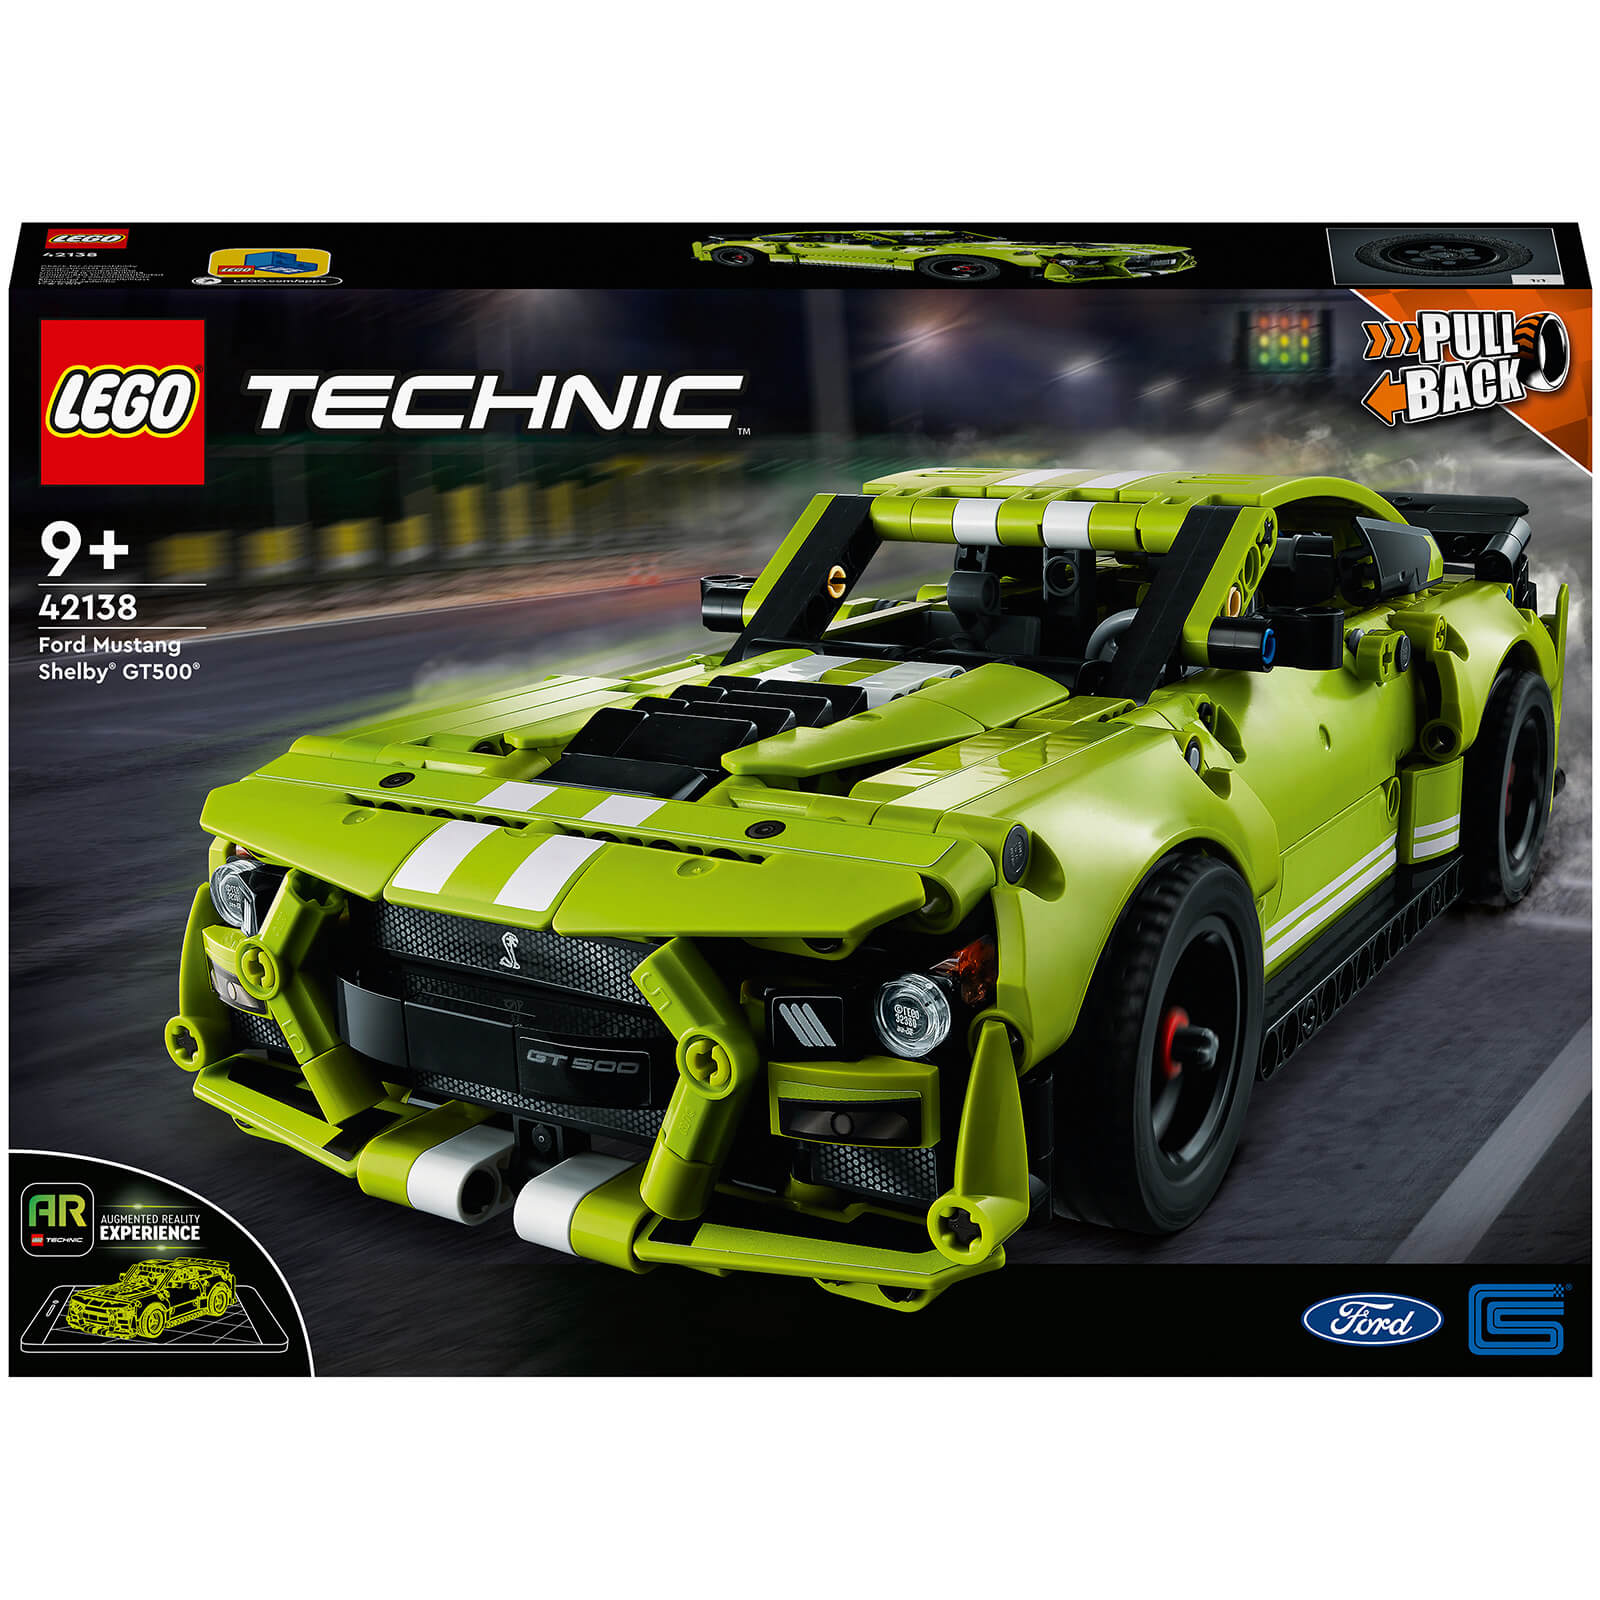 Image of LEGO Technic: Ford Mustang Shelby GT500 AR Race Car Toy (42138)